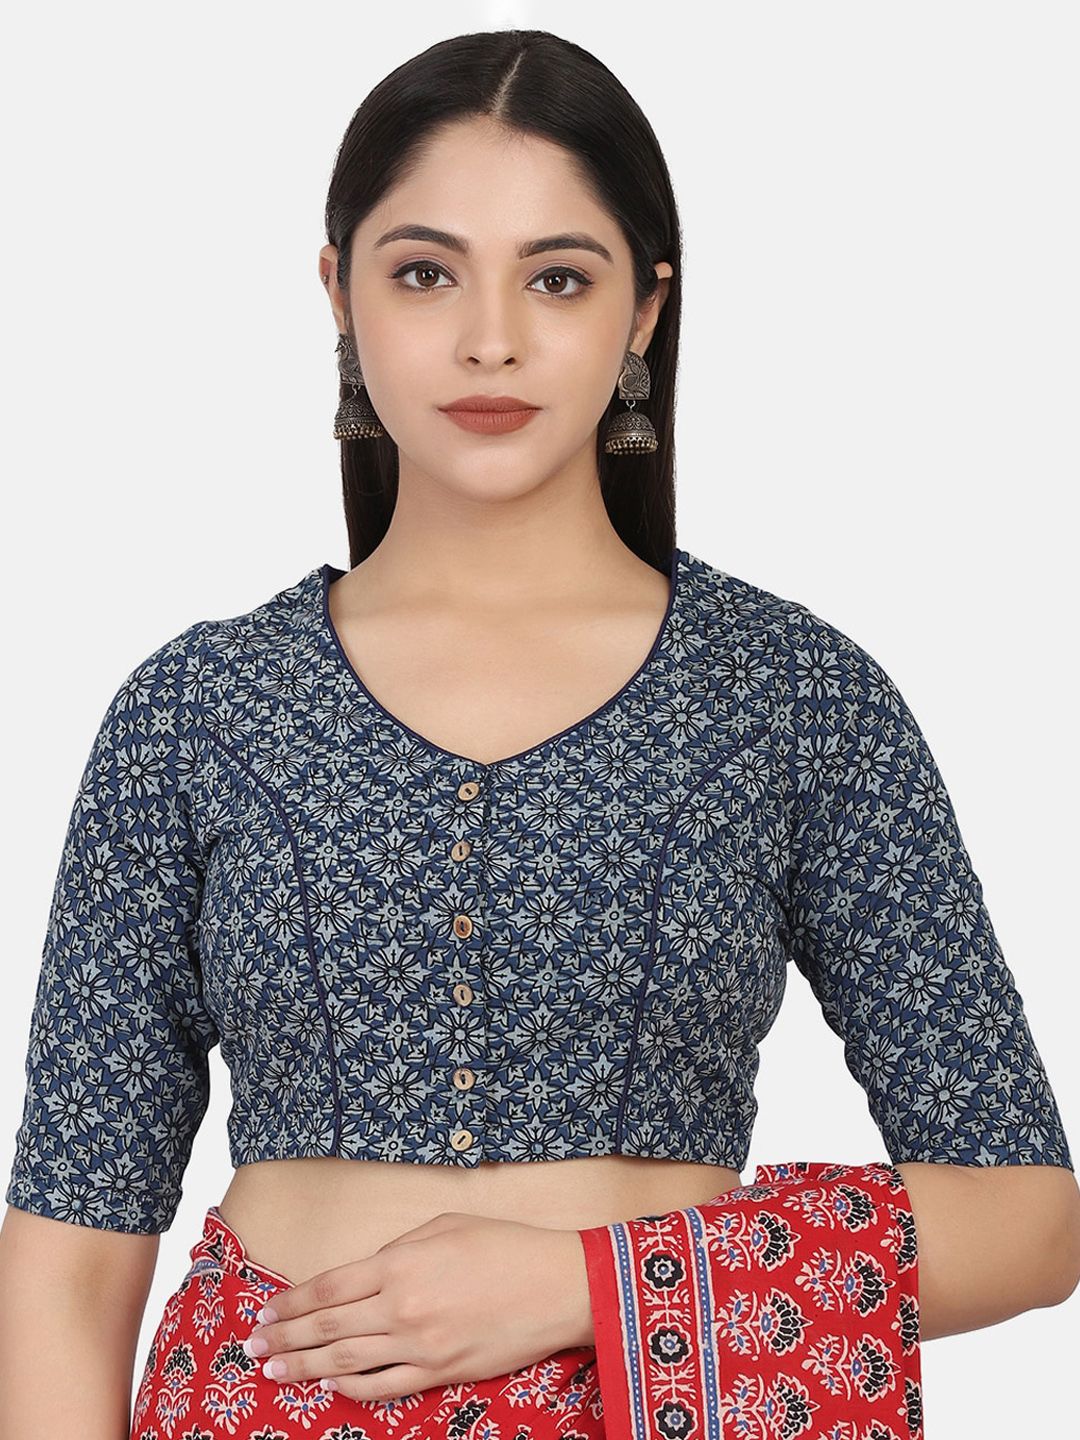 THE WEAVE TRAVELLER Women Blue & Grey Ajrakh Block Printed Cotton Ready To Wear Saree Blouse Price in India